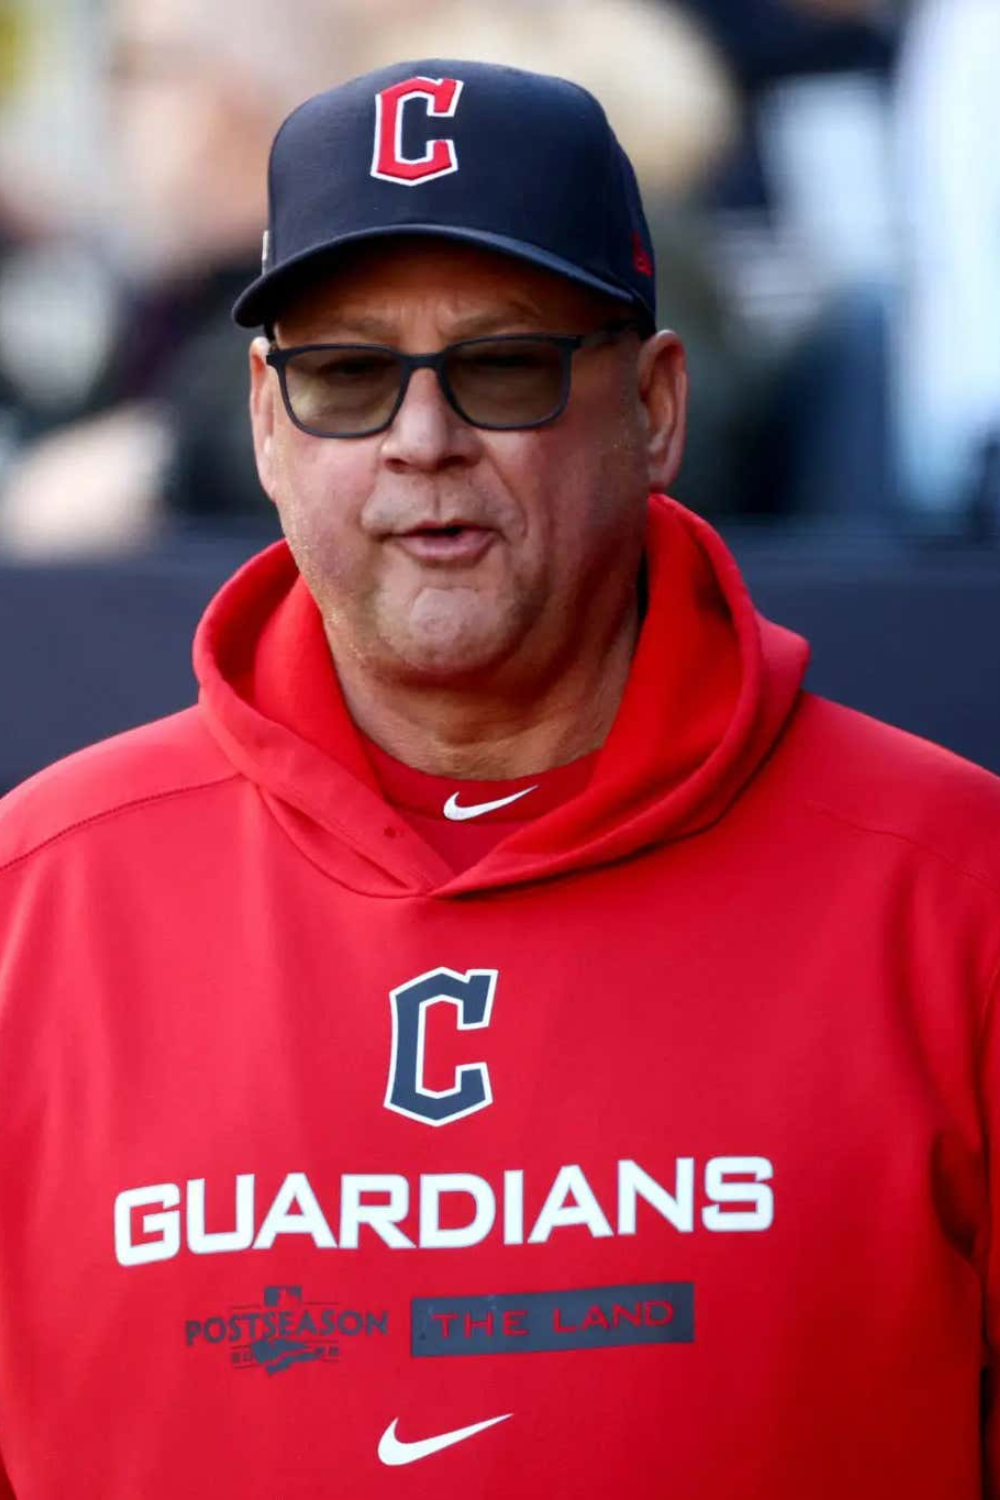 Terry Francona, The Manager For The Cleveland Guardians